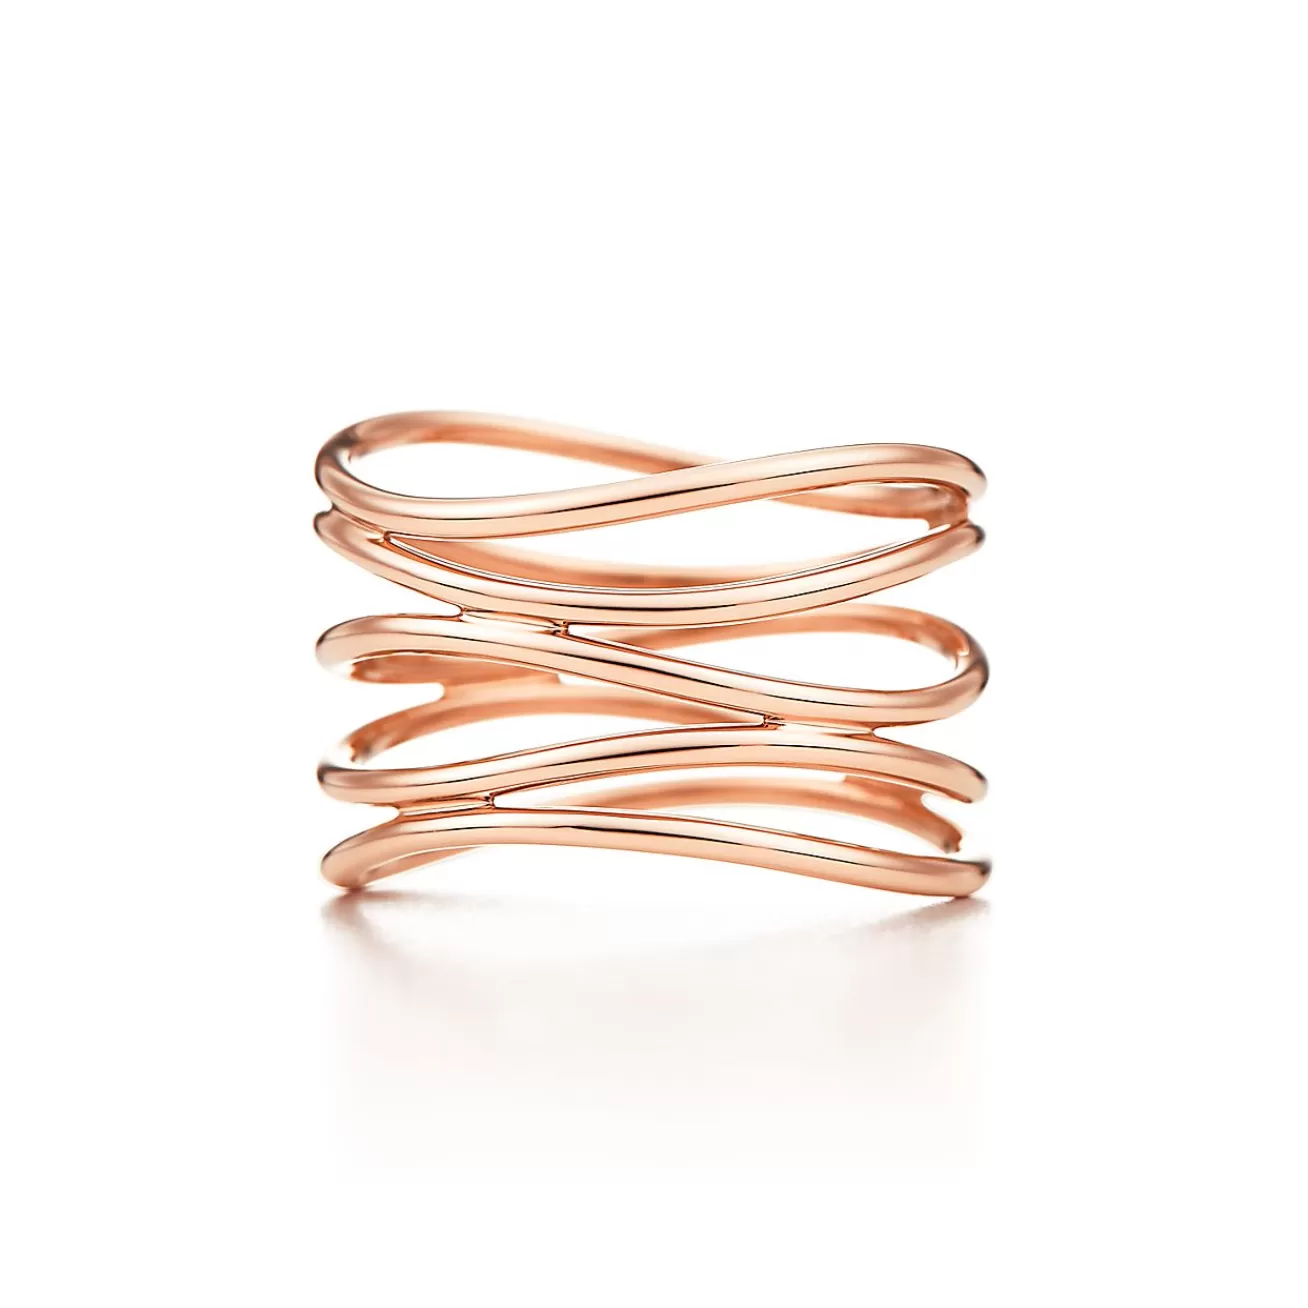 Tiffany & Co. Elsa Peretti® Wave five-row ring in 18k rose gold. | ^ Rings | Rose Gold Jewelry